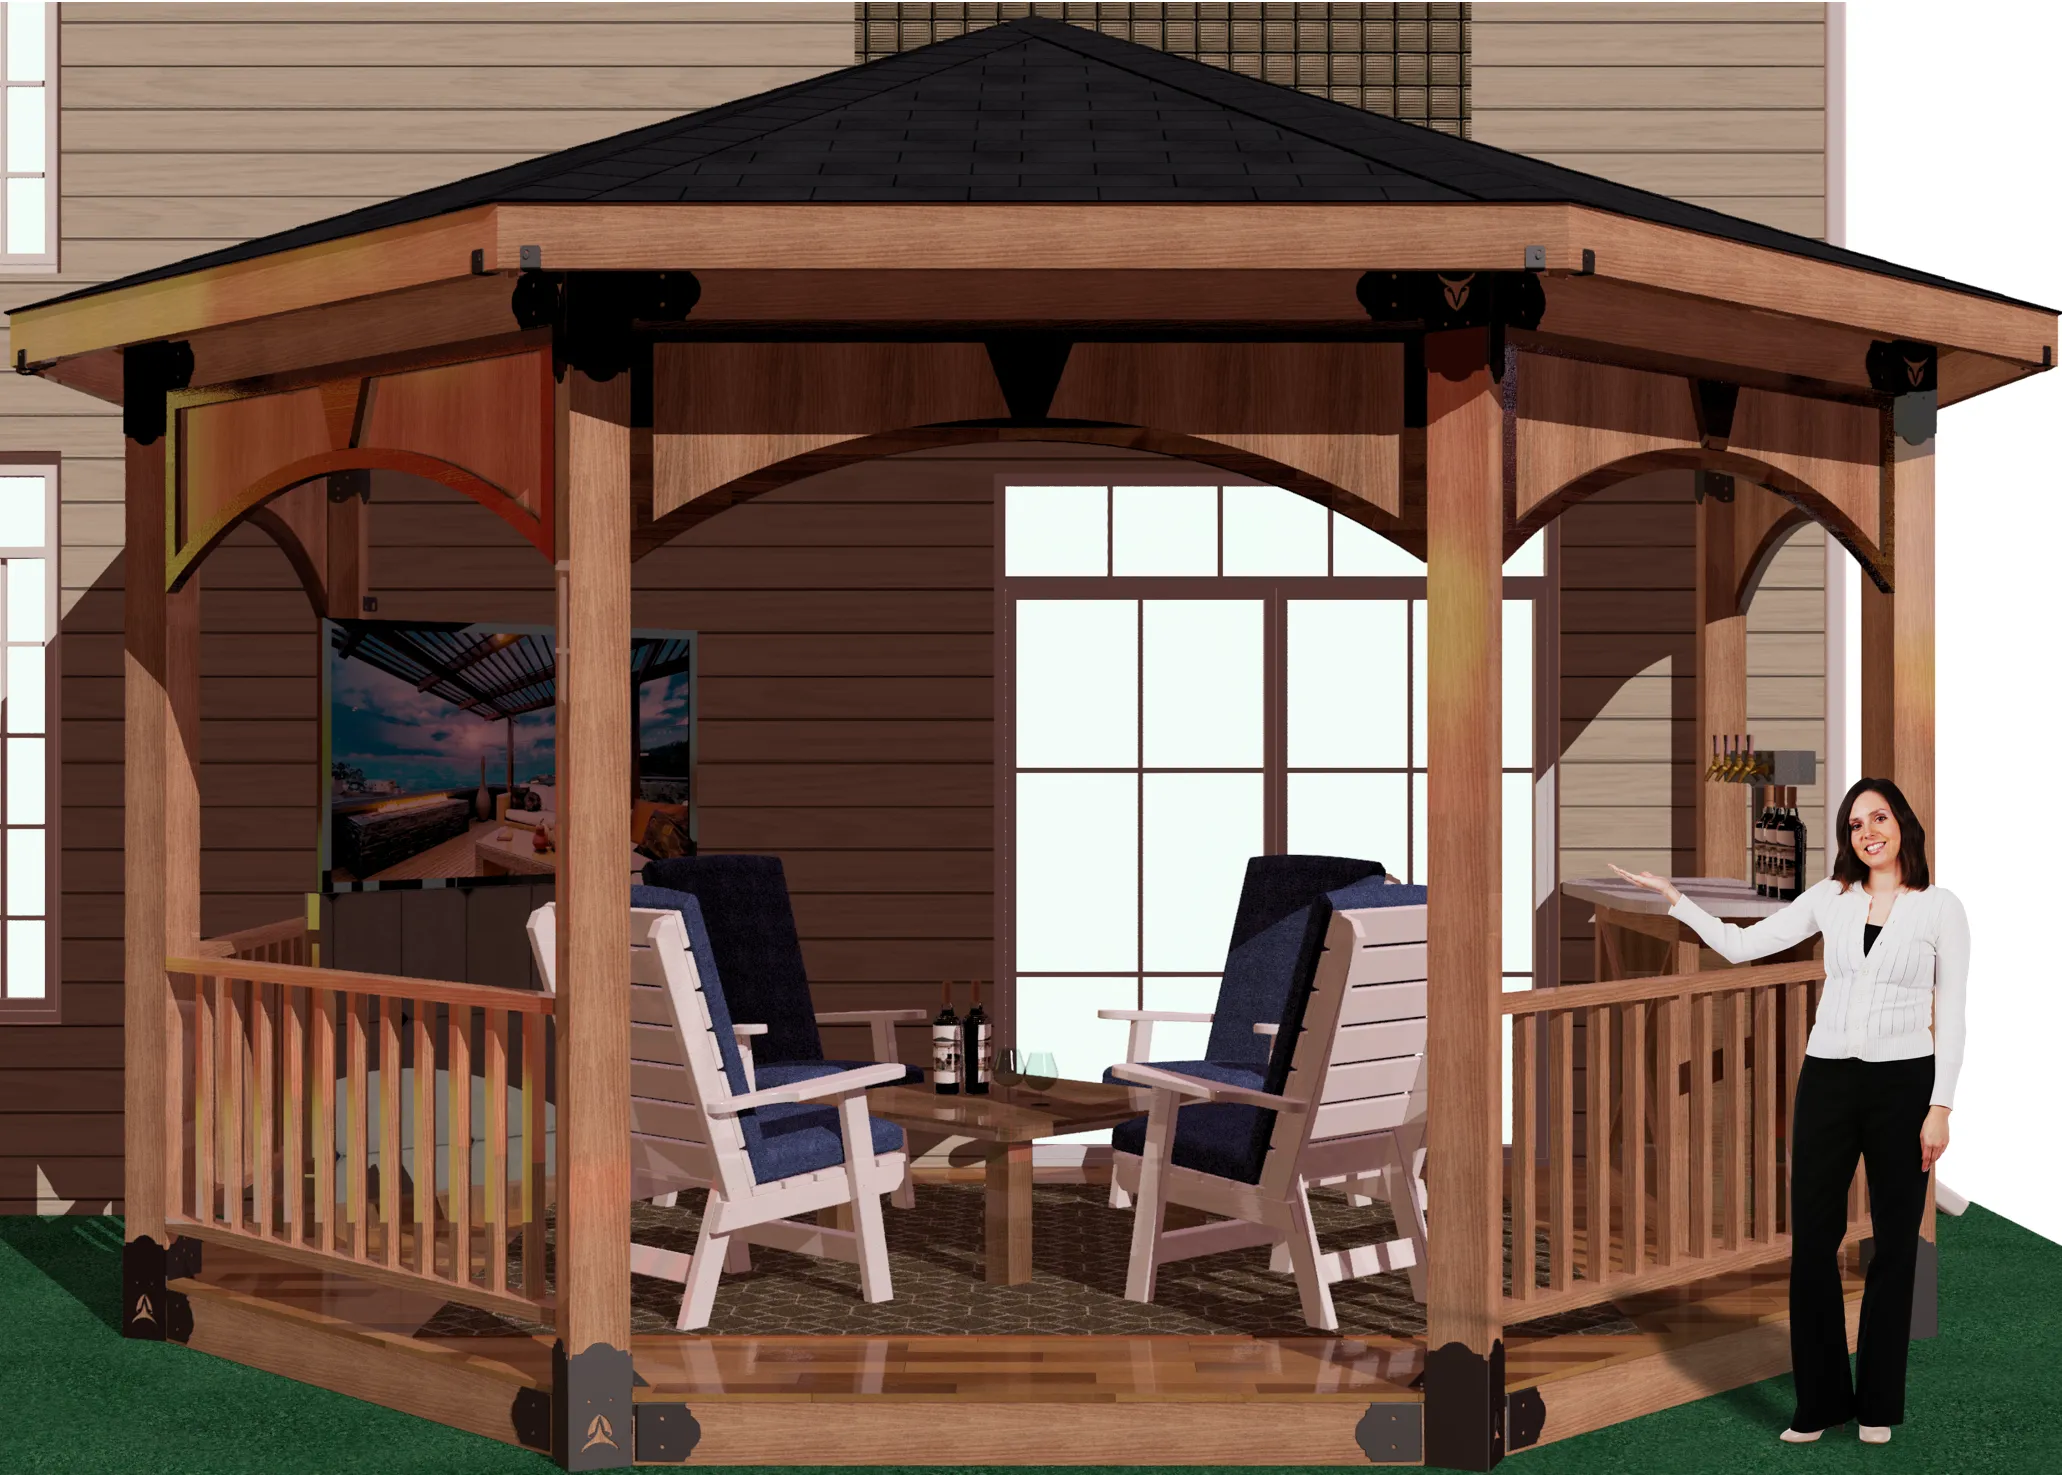 diy, 6x6, wall attached, floating deck, solid roofed patio cover with bar, barbecuer, tv, and casual seating